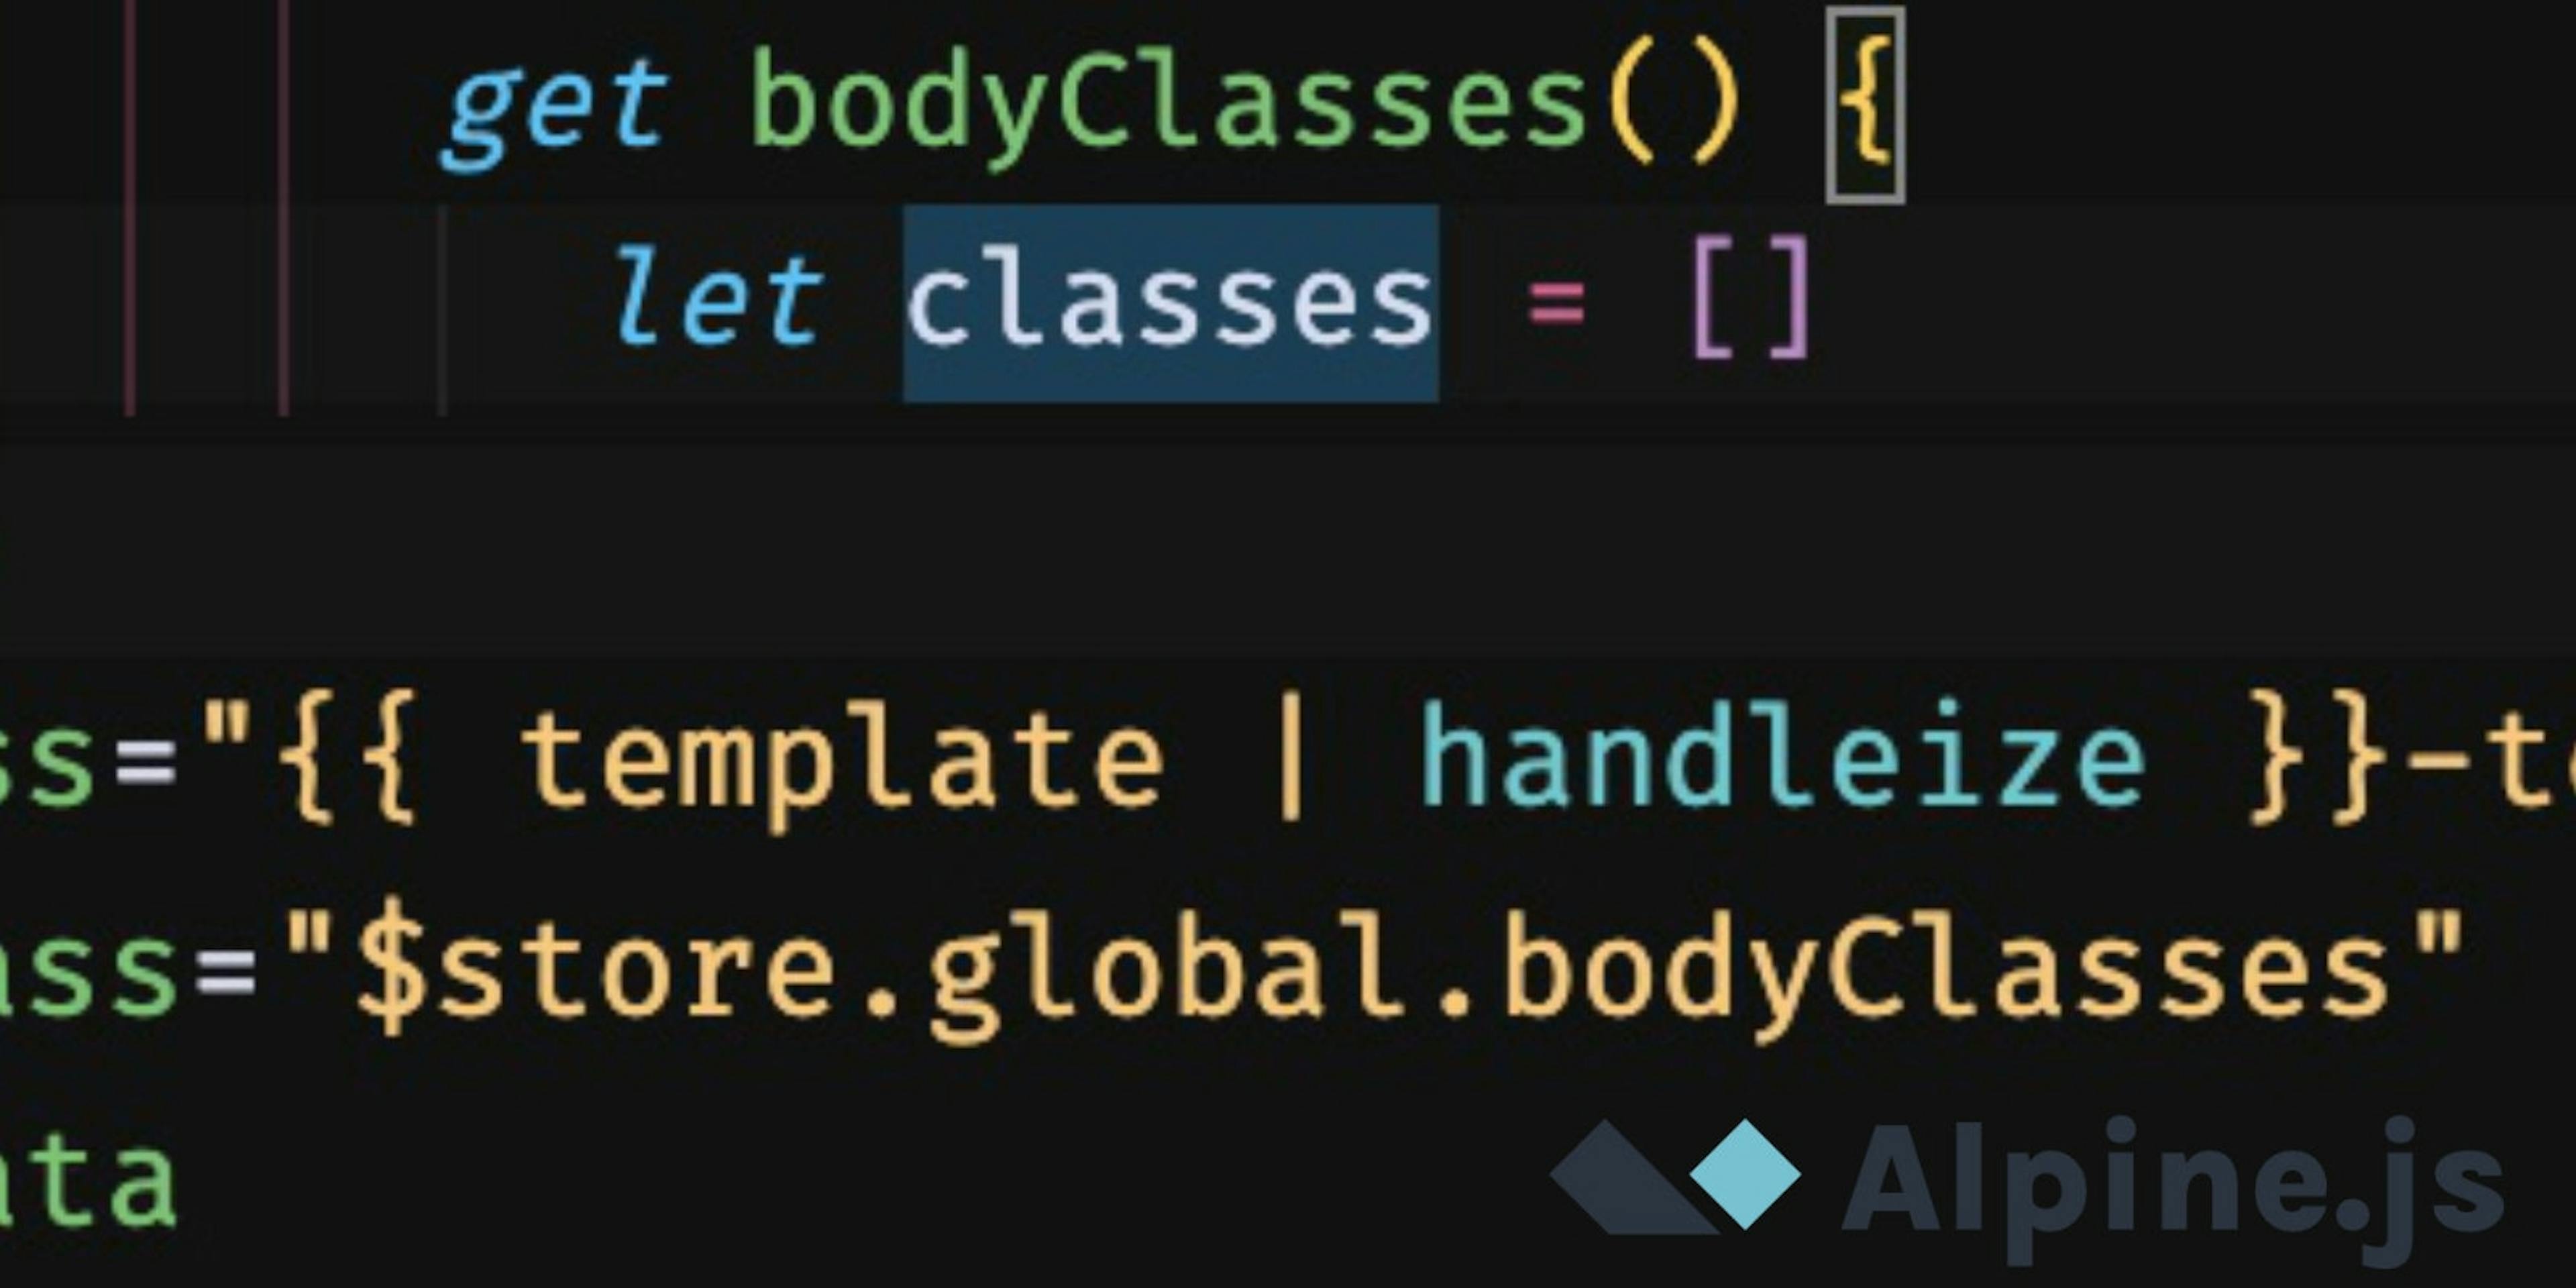 Code showing body element classes implemented with alpine.js